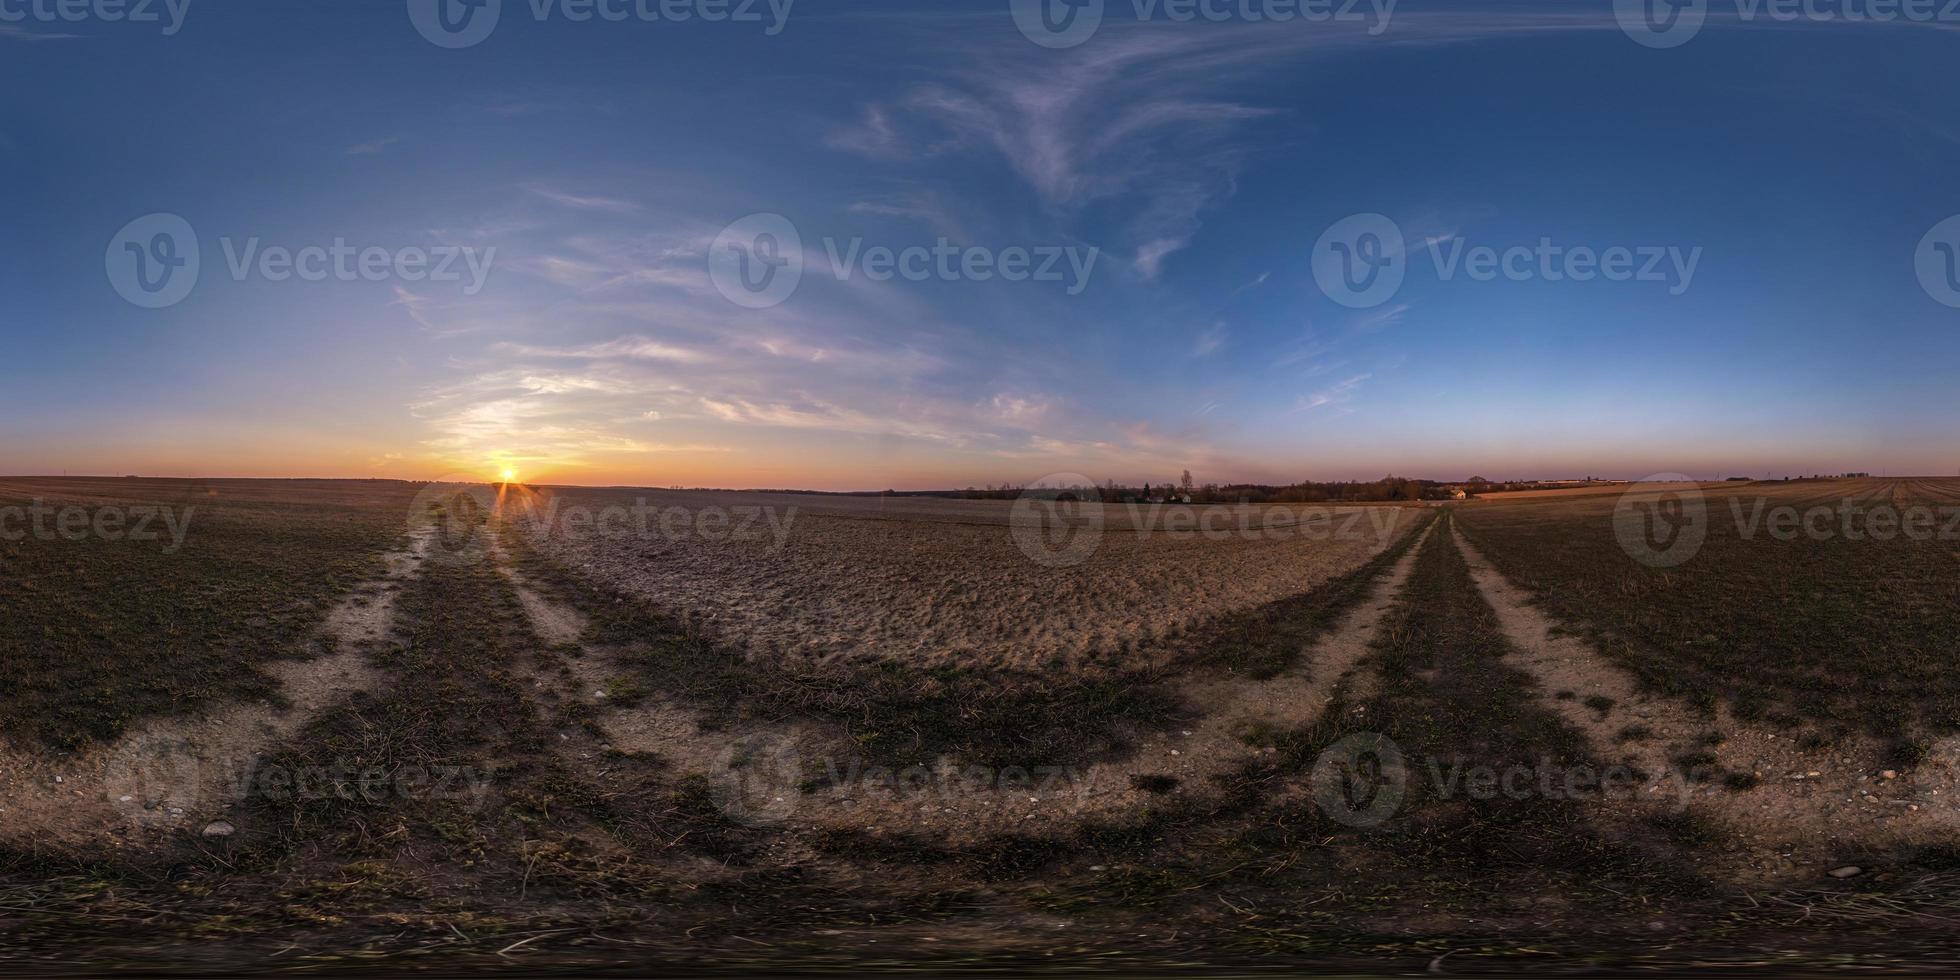 full seamless spherical hdri panorama 360 degrees angle view among fields in evening sunset with awesome blue pink red clouds in equirectangular projection, ready for VR AR virtual reality photo